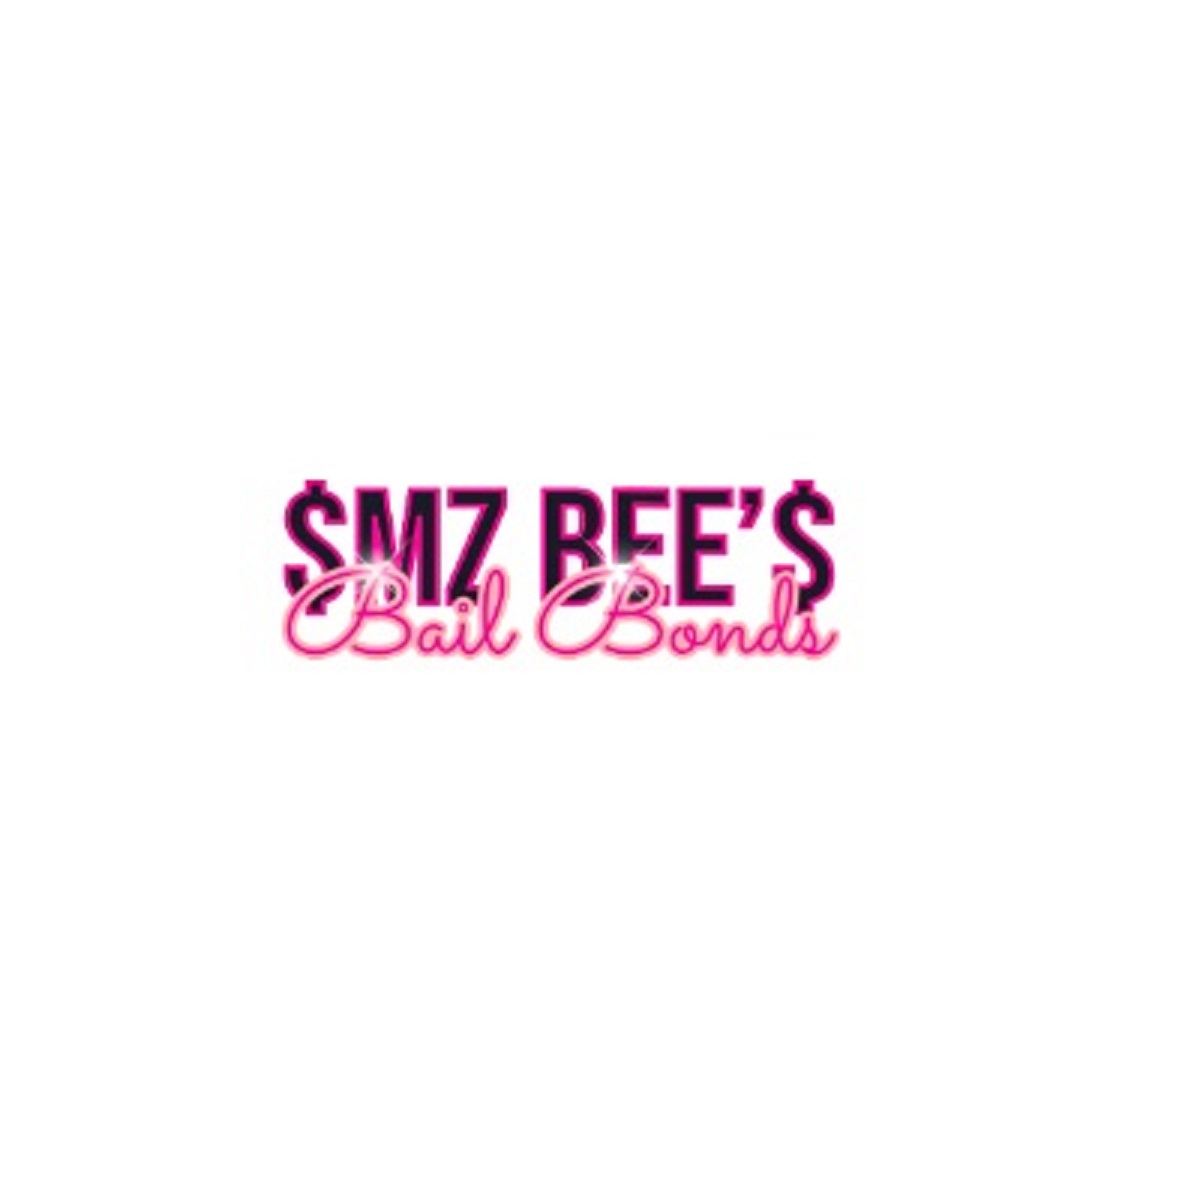 MzBees Bail Bonds Service Cover Image